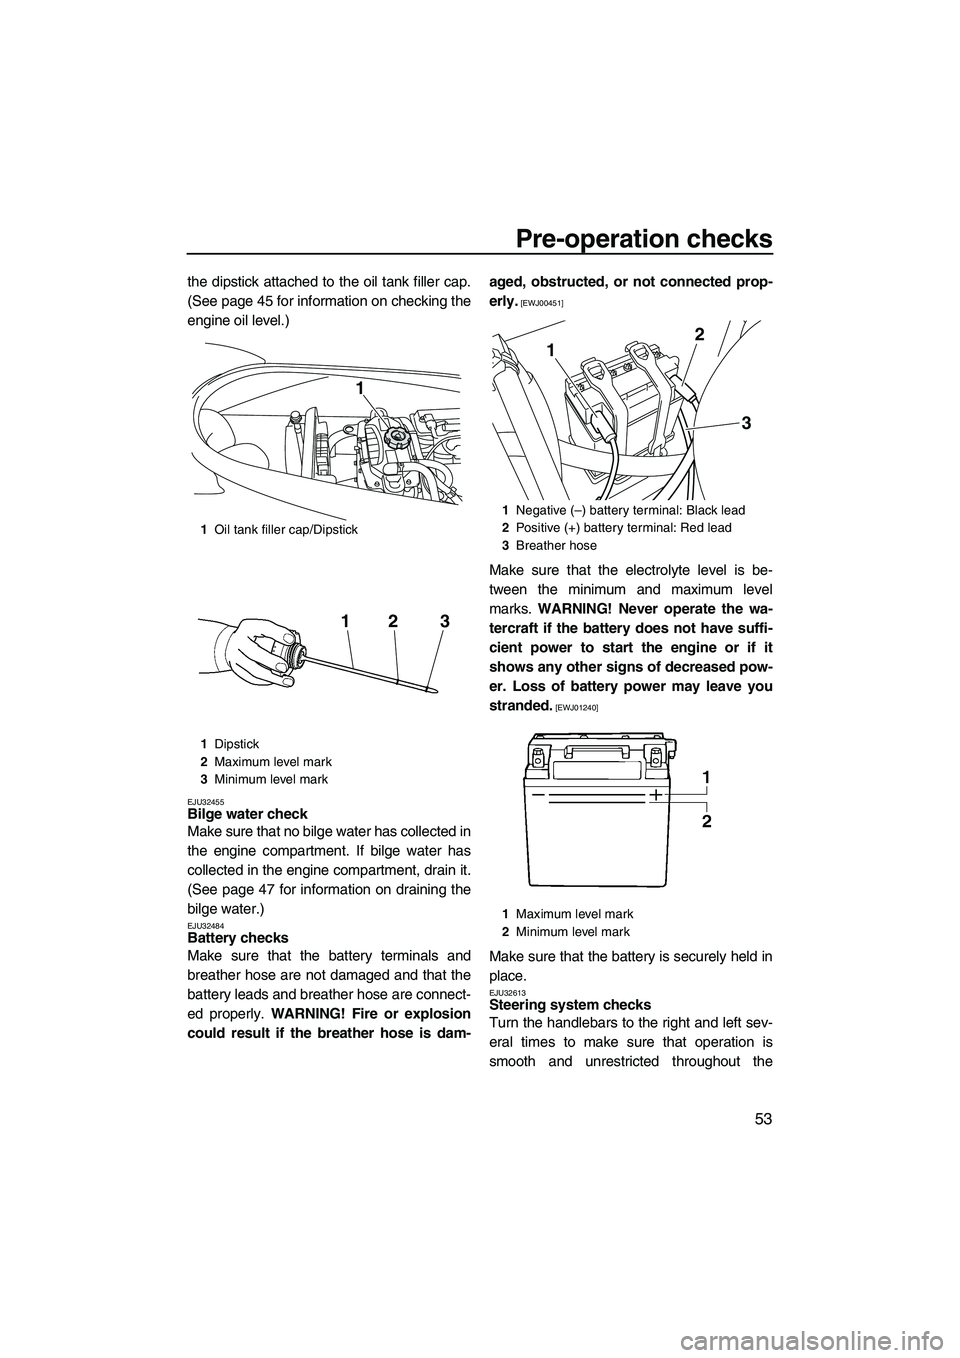 YAMAHA VX SPORT 2013  Owners Manual Pre-operation checks
53
the dipstick attached to the oil tank filler cap.
(See page 45 for information on checking the
engine oil level.)
EJU32455Bilge water check 
Make sure that no bilge water has c